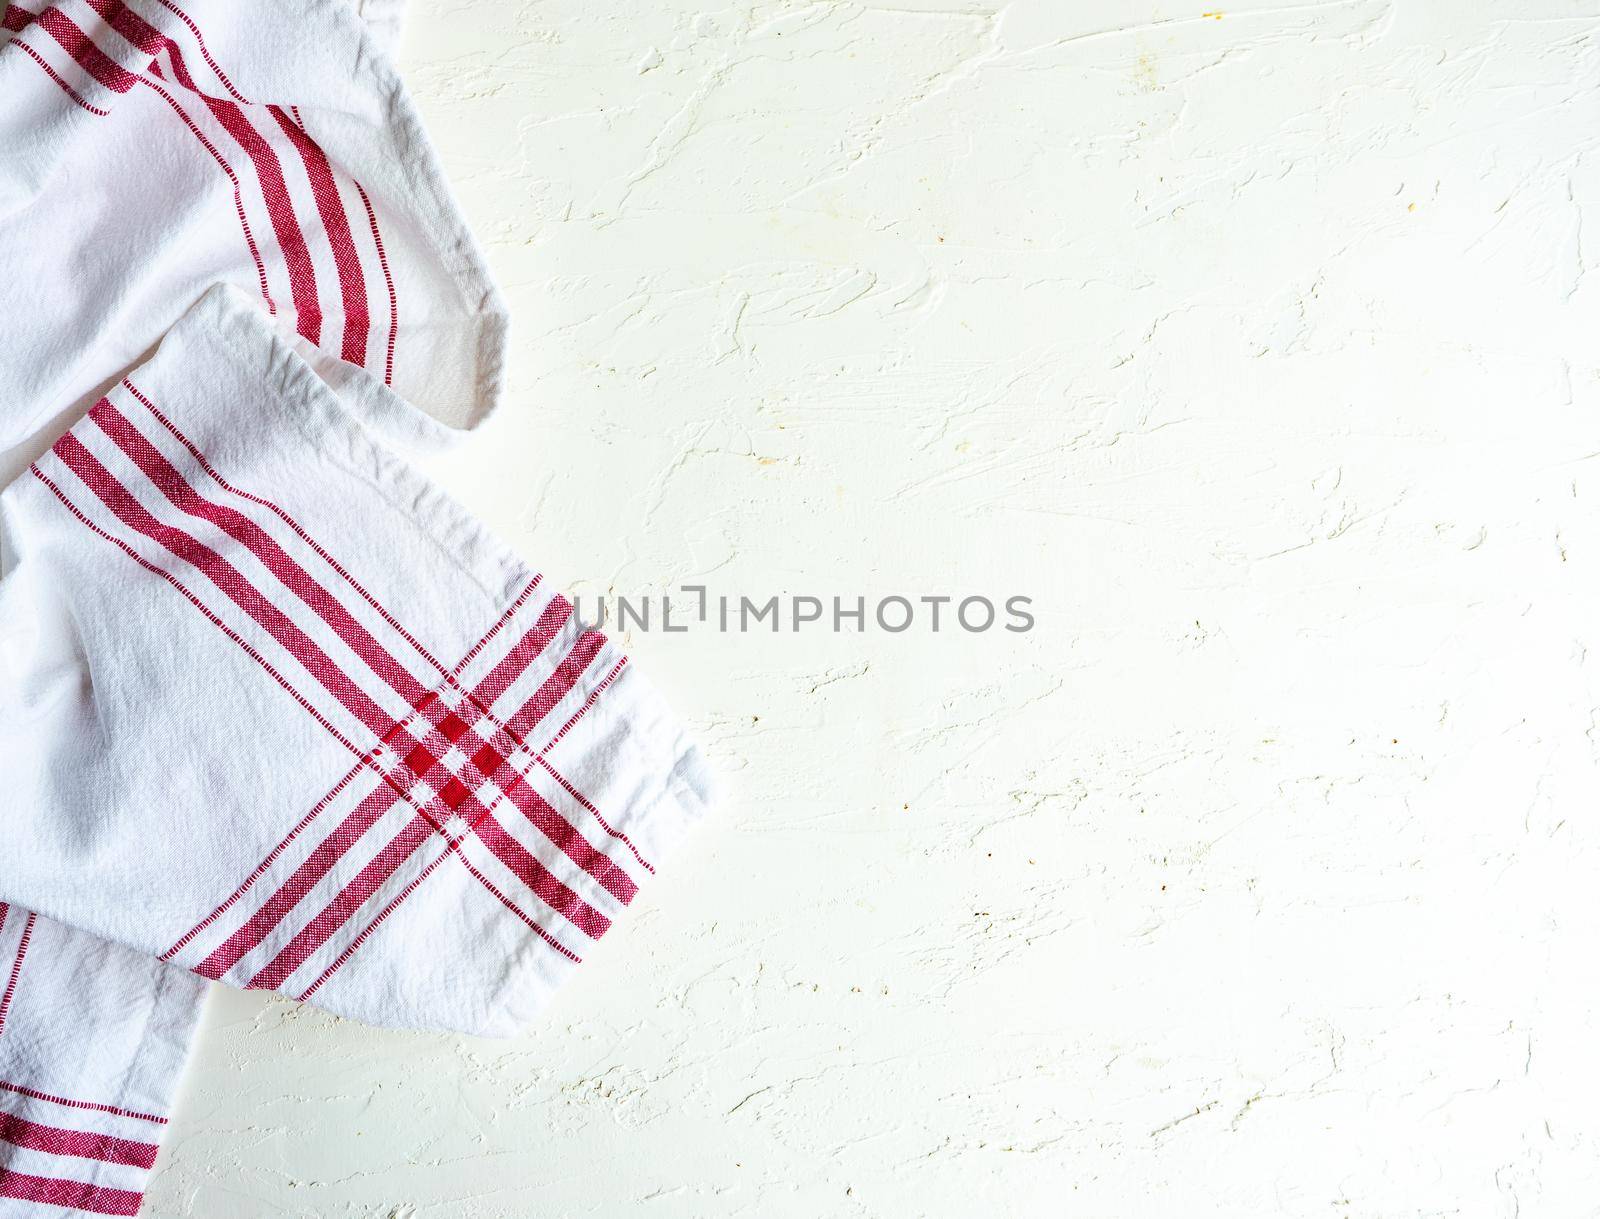 Kitchen textile towel on concrete table background with copy space